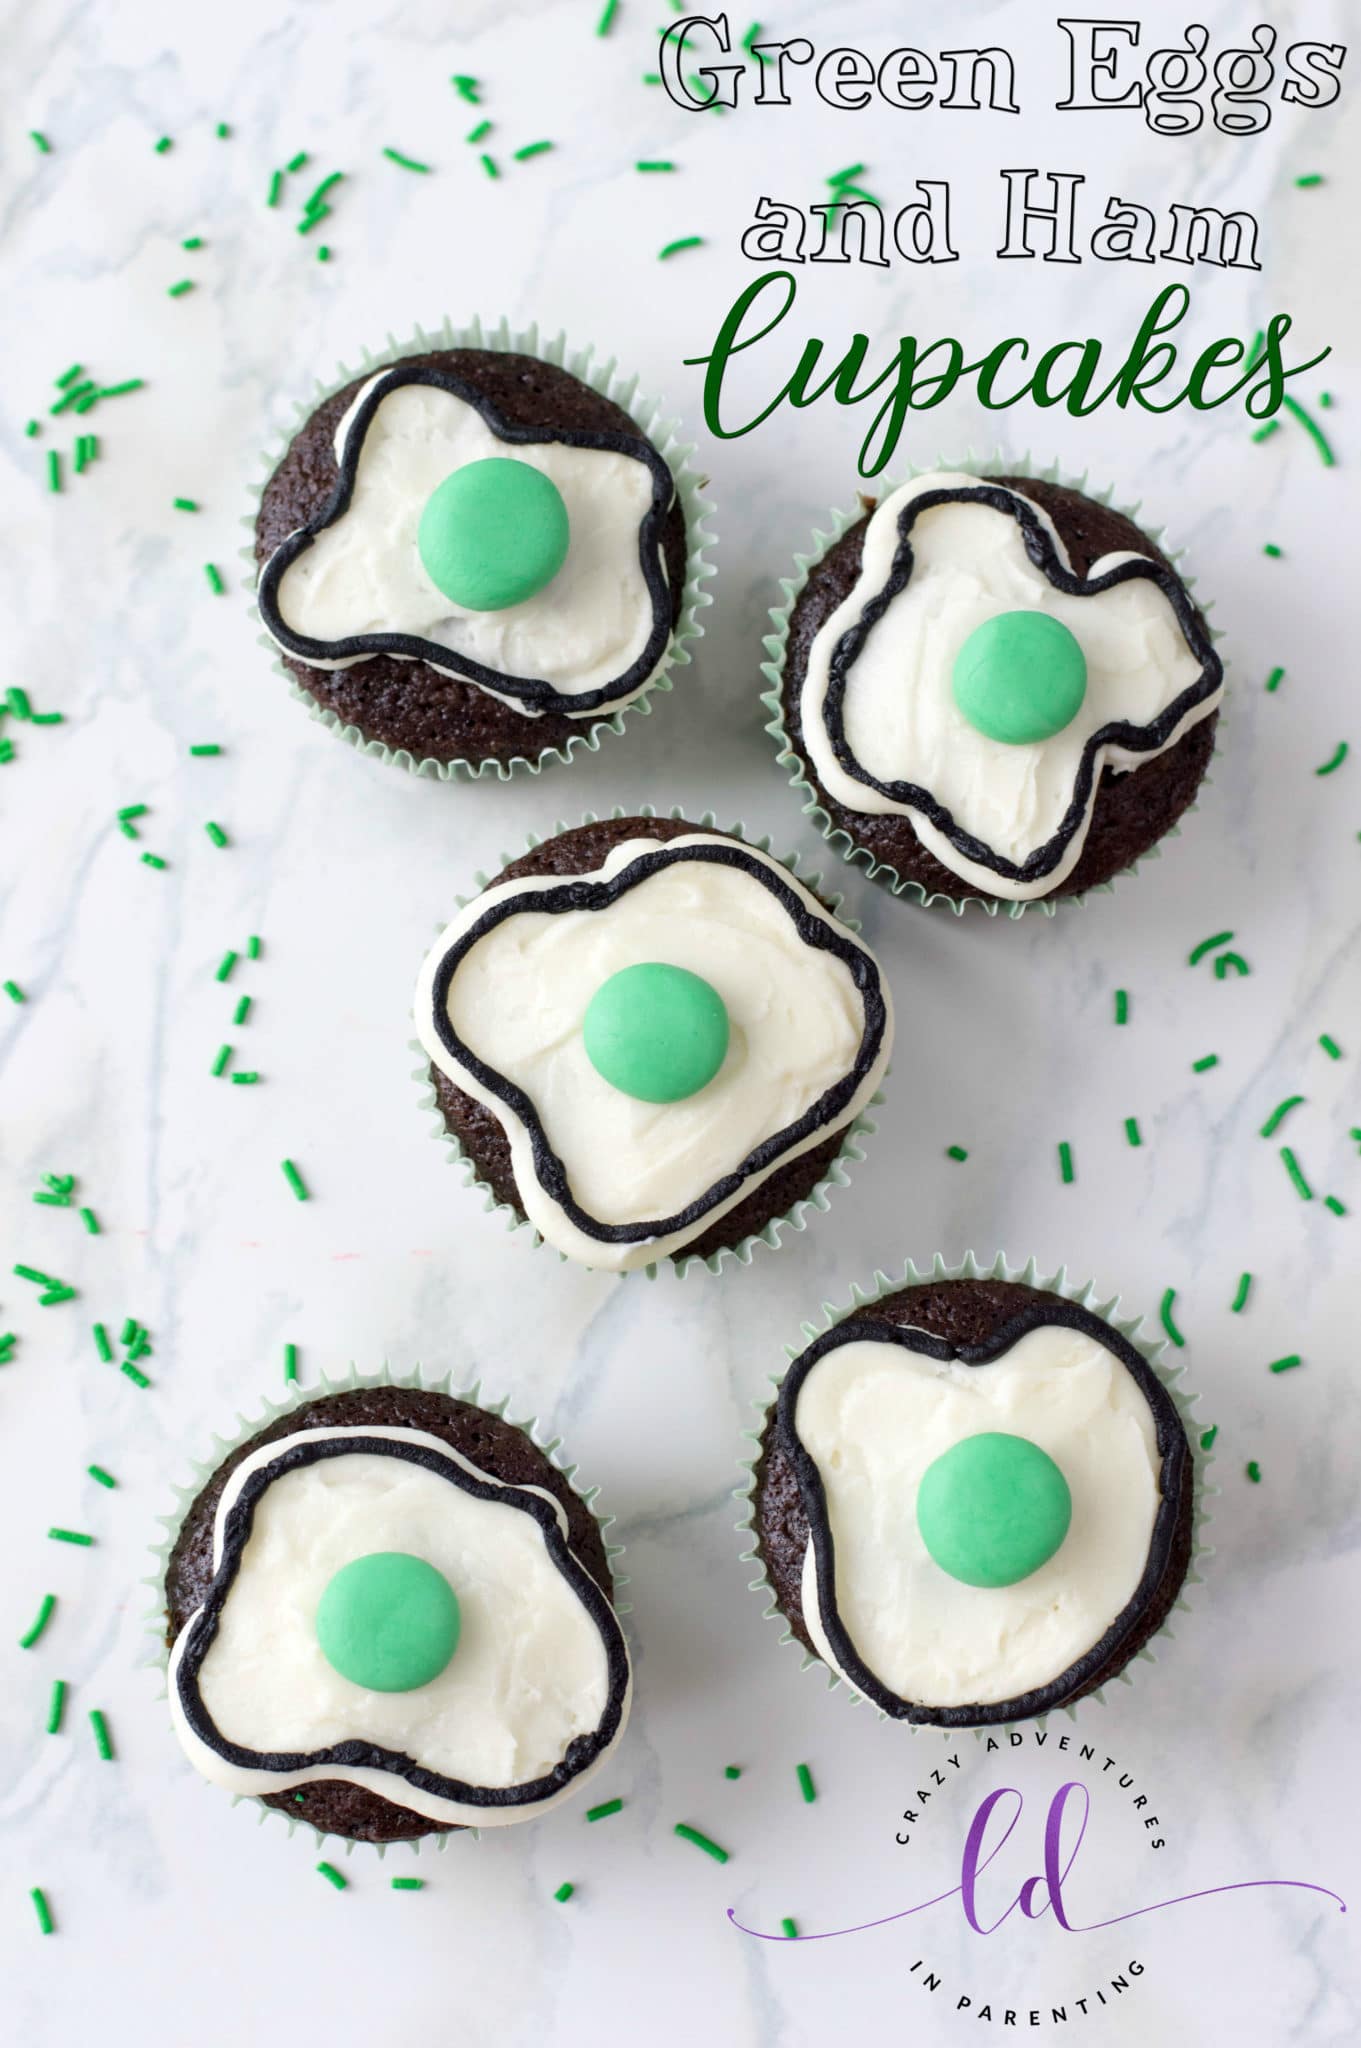 Green Eggs and Ham Cupcakes for Dr. Seuss' Birthday